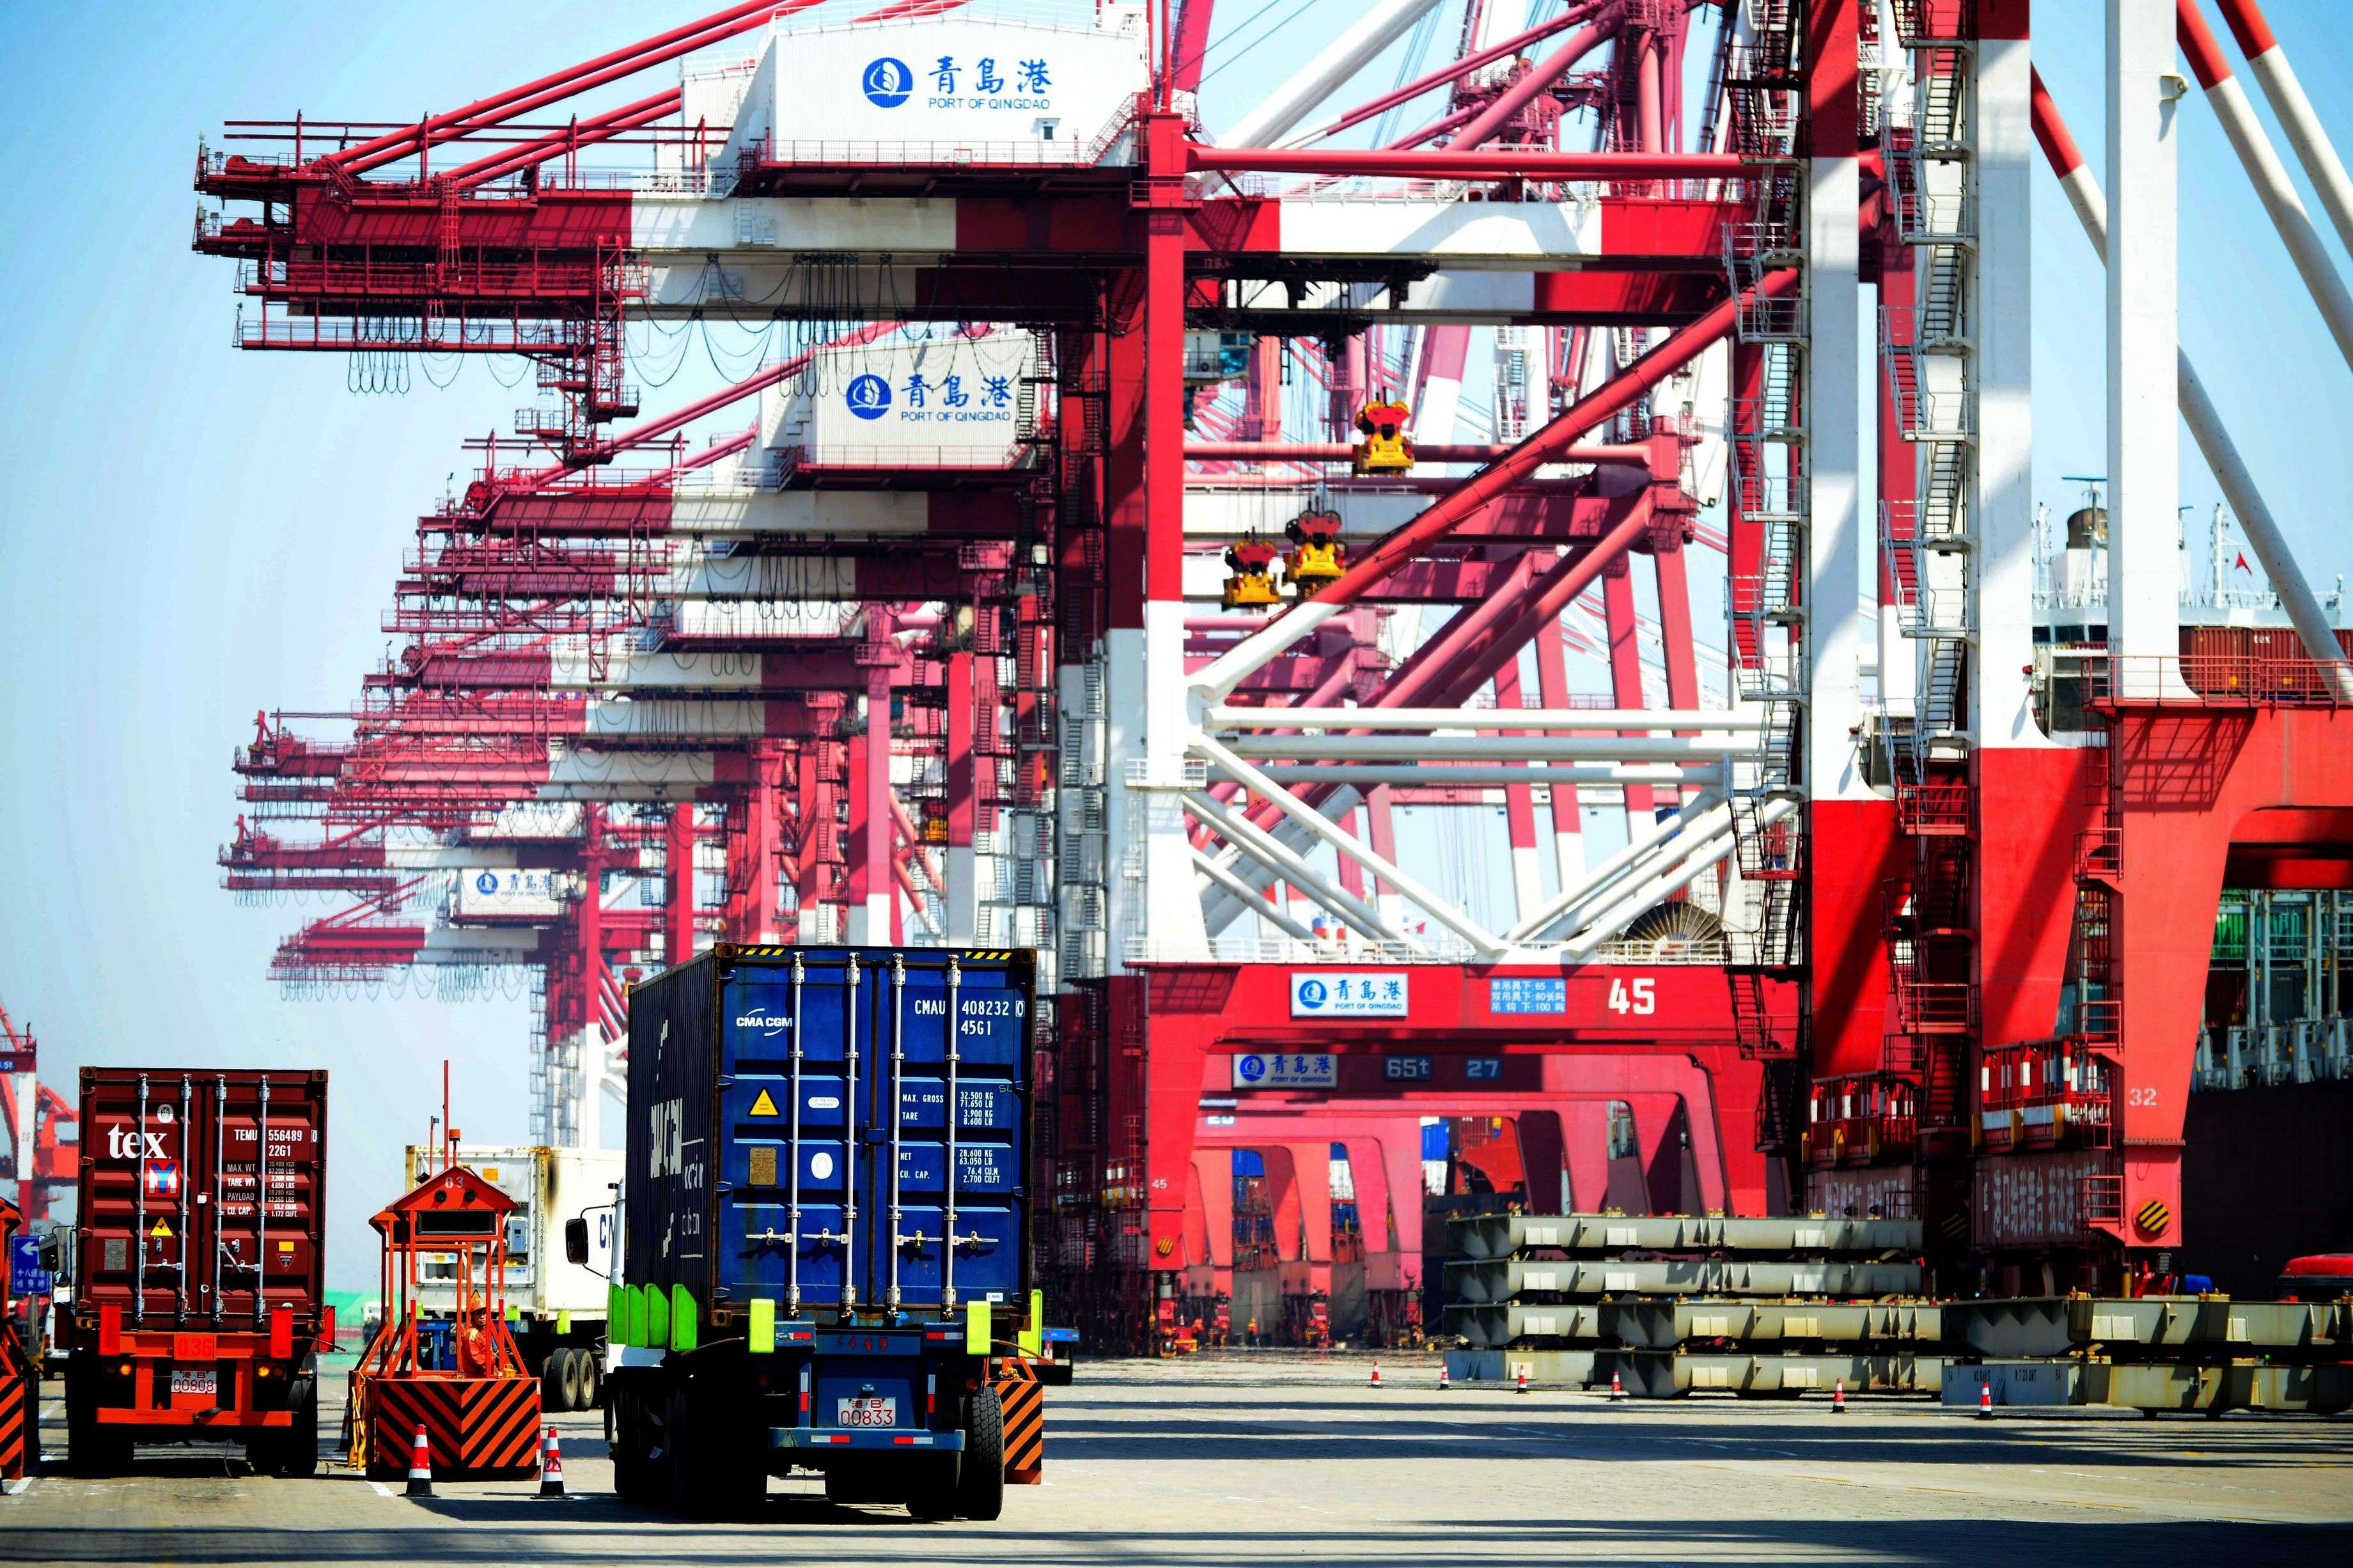 China’s GDP grew 6.9 per cent in the first quarter on year, according to data from the National Bureau of Statistics. Photo: AFP